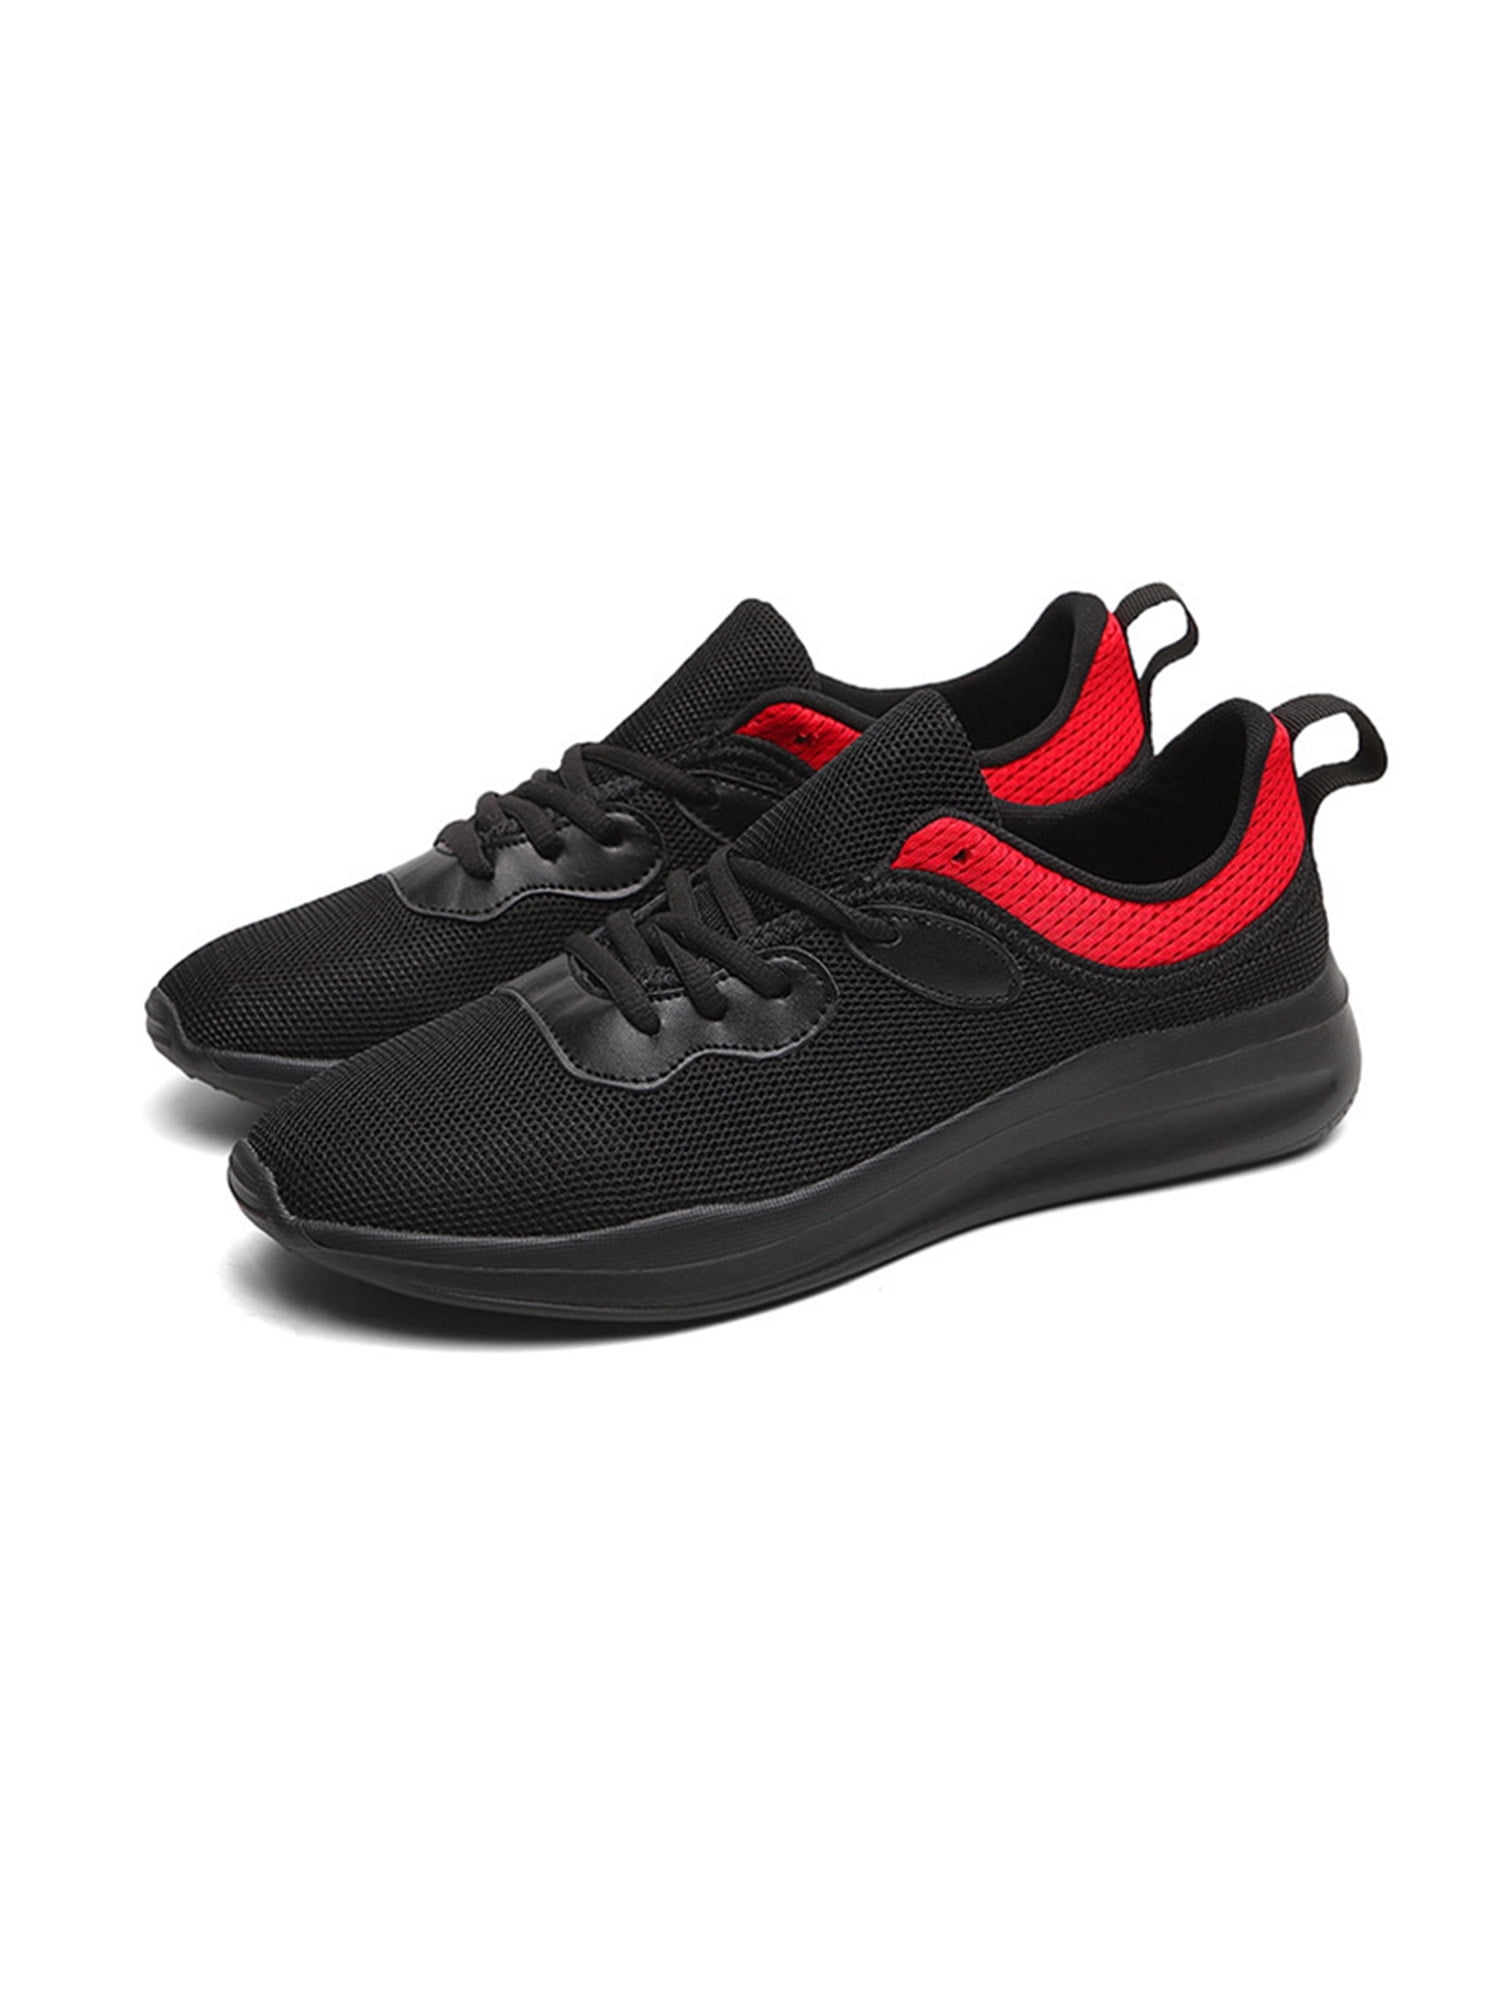 Details about   Men Breathable Casual Sneaker Walking Trainer Athletic Sport Running Shoes Gym B 